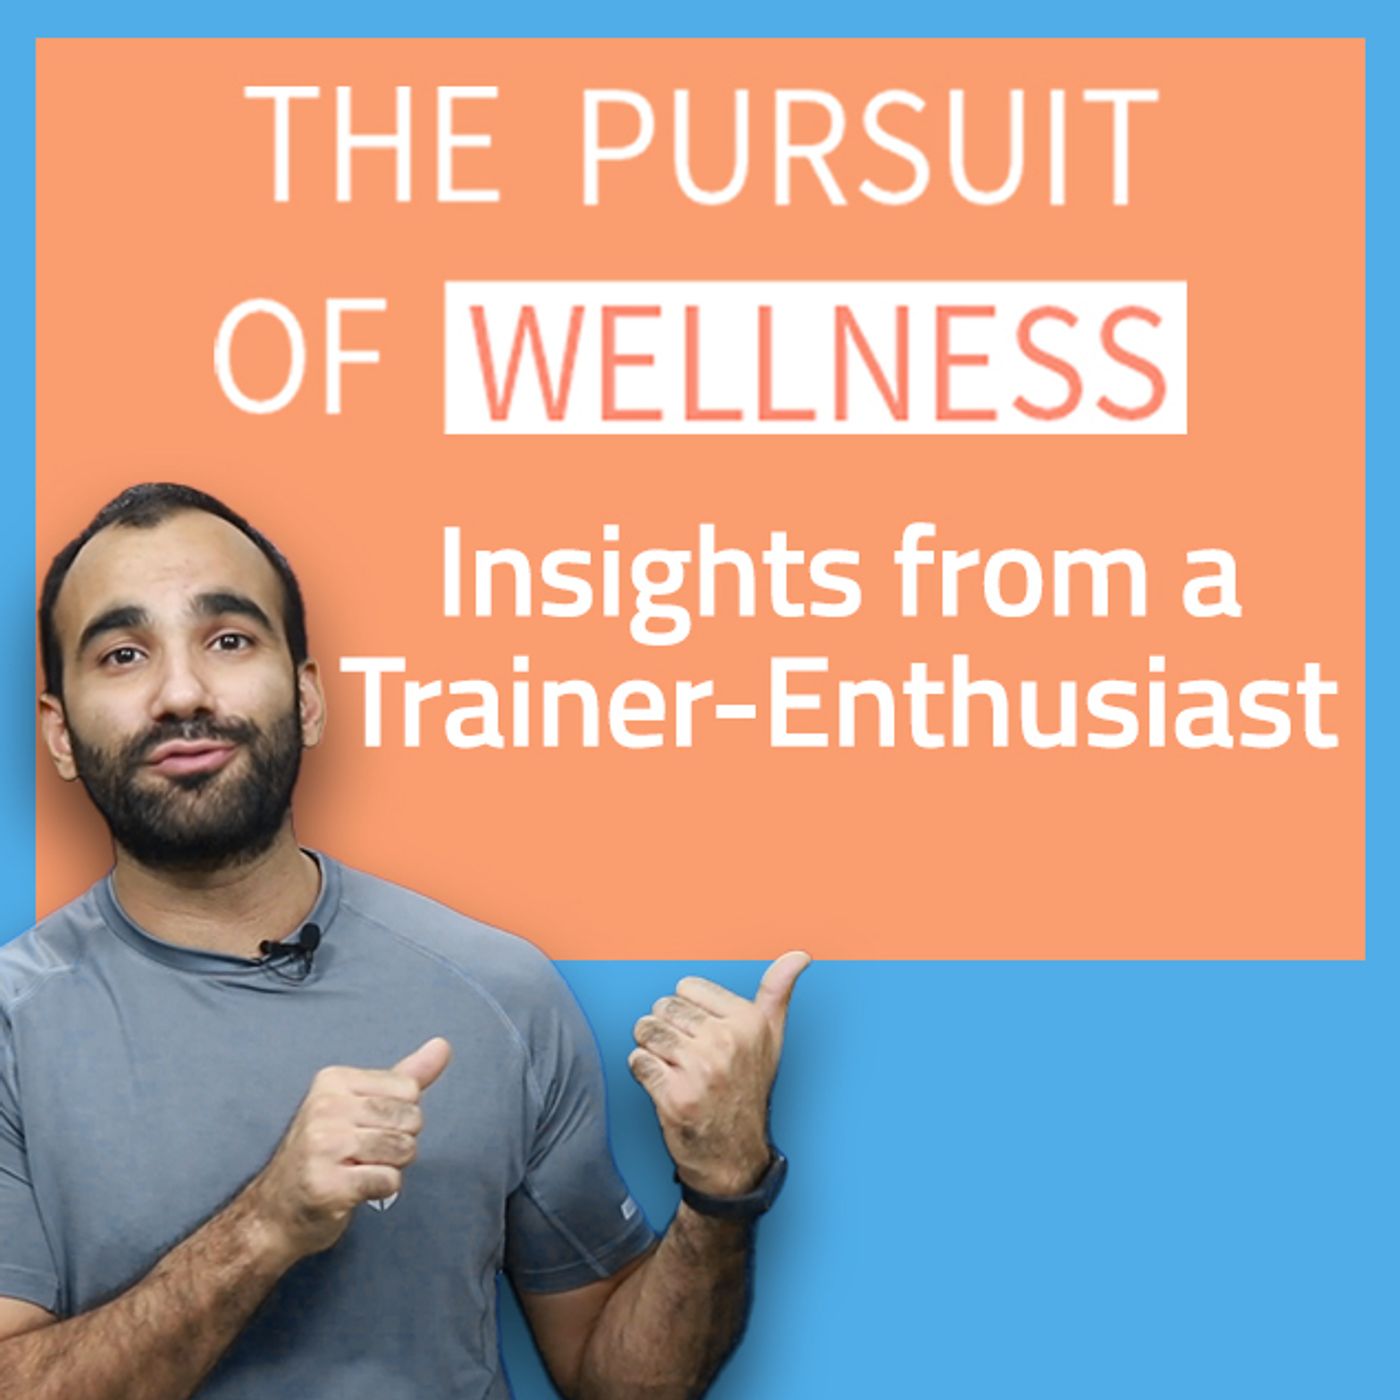 S2 Ep12: "Insights from a Trainer-Enthusiast" with Jaivir Hans